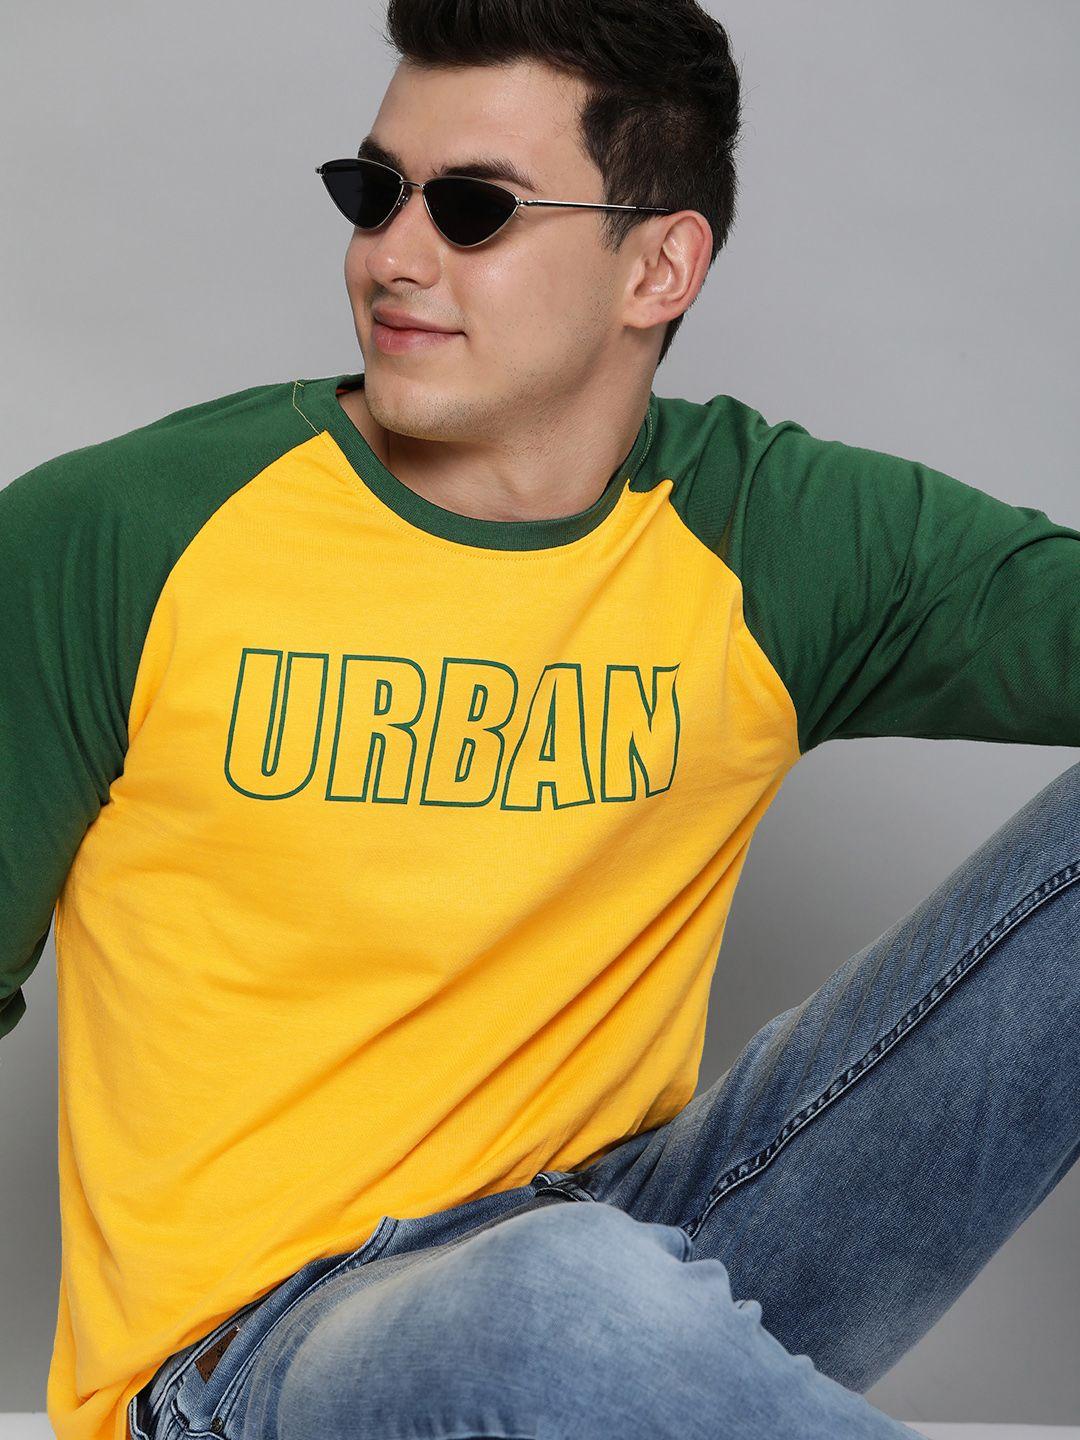 here&now men yellow & green colourblocked typography printed casual t-shirt